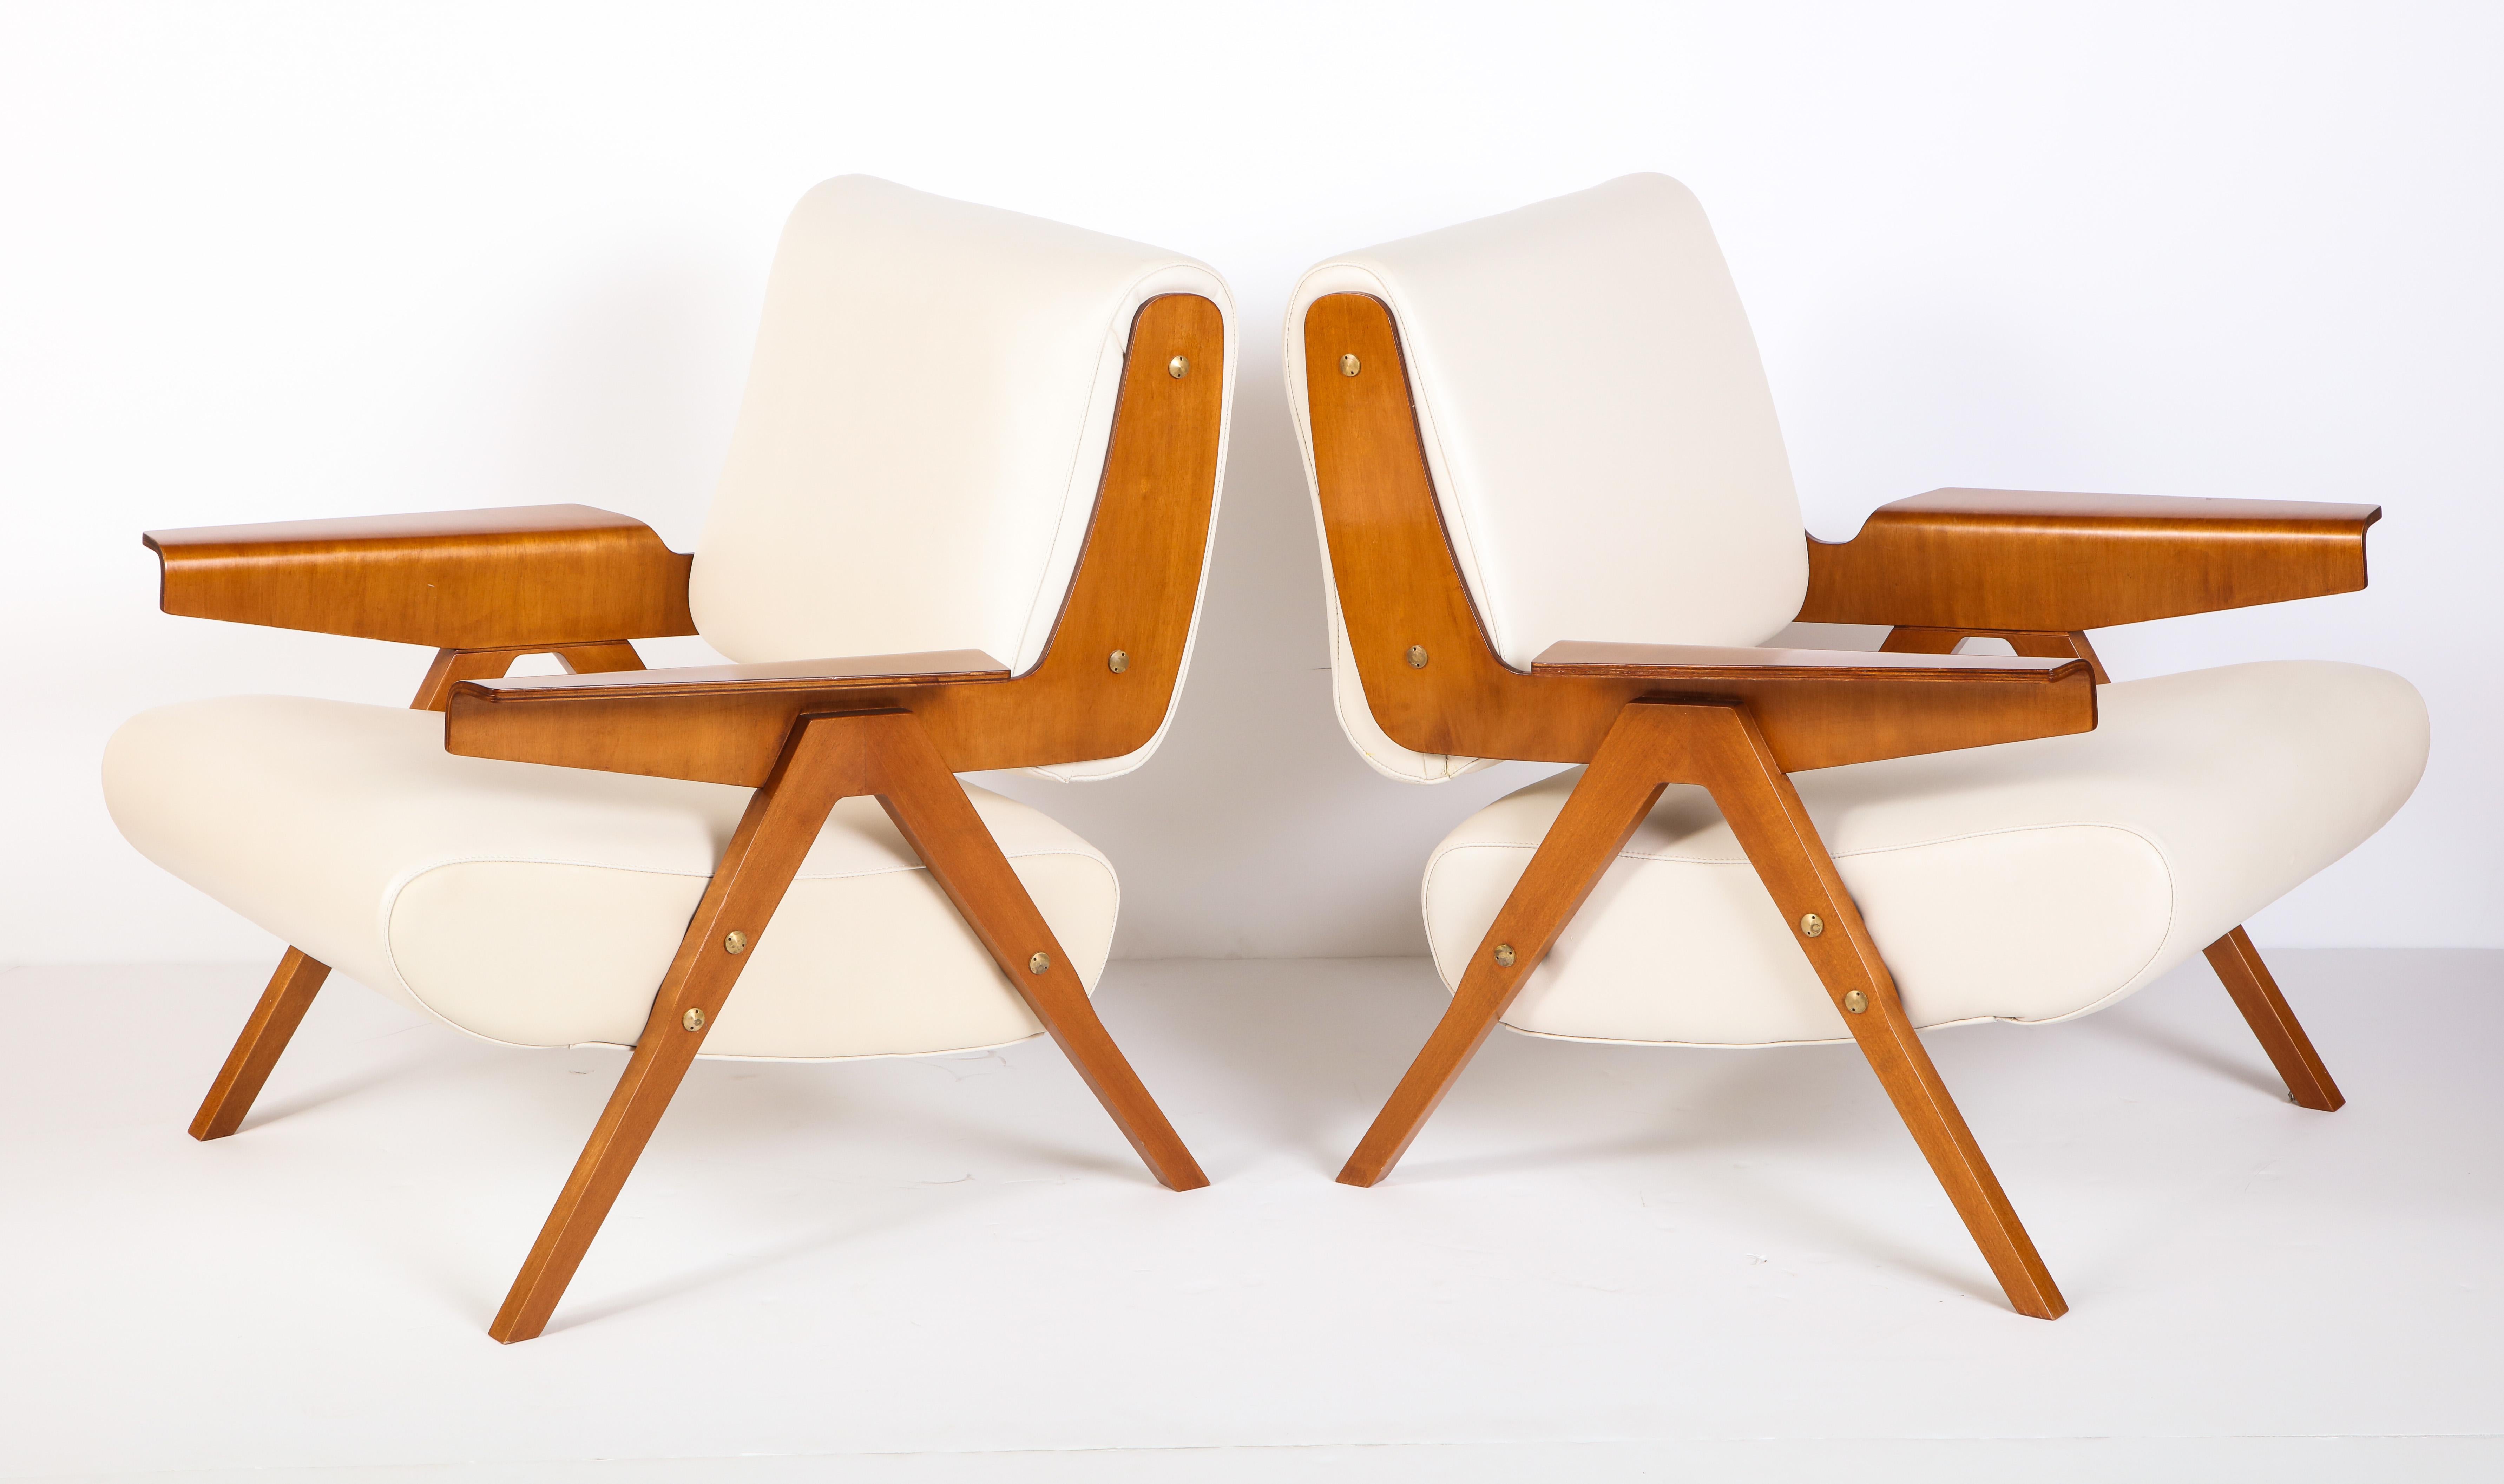 An exceptionally rare and fabulous pair of lounge chairs by Gianfranco Frattini. The bent plywood and angular legs make these very distinctive chairs.